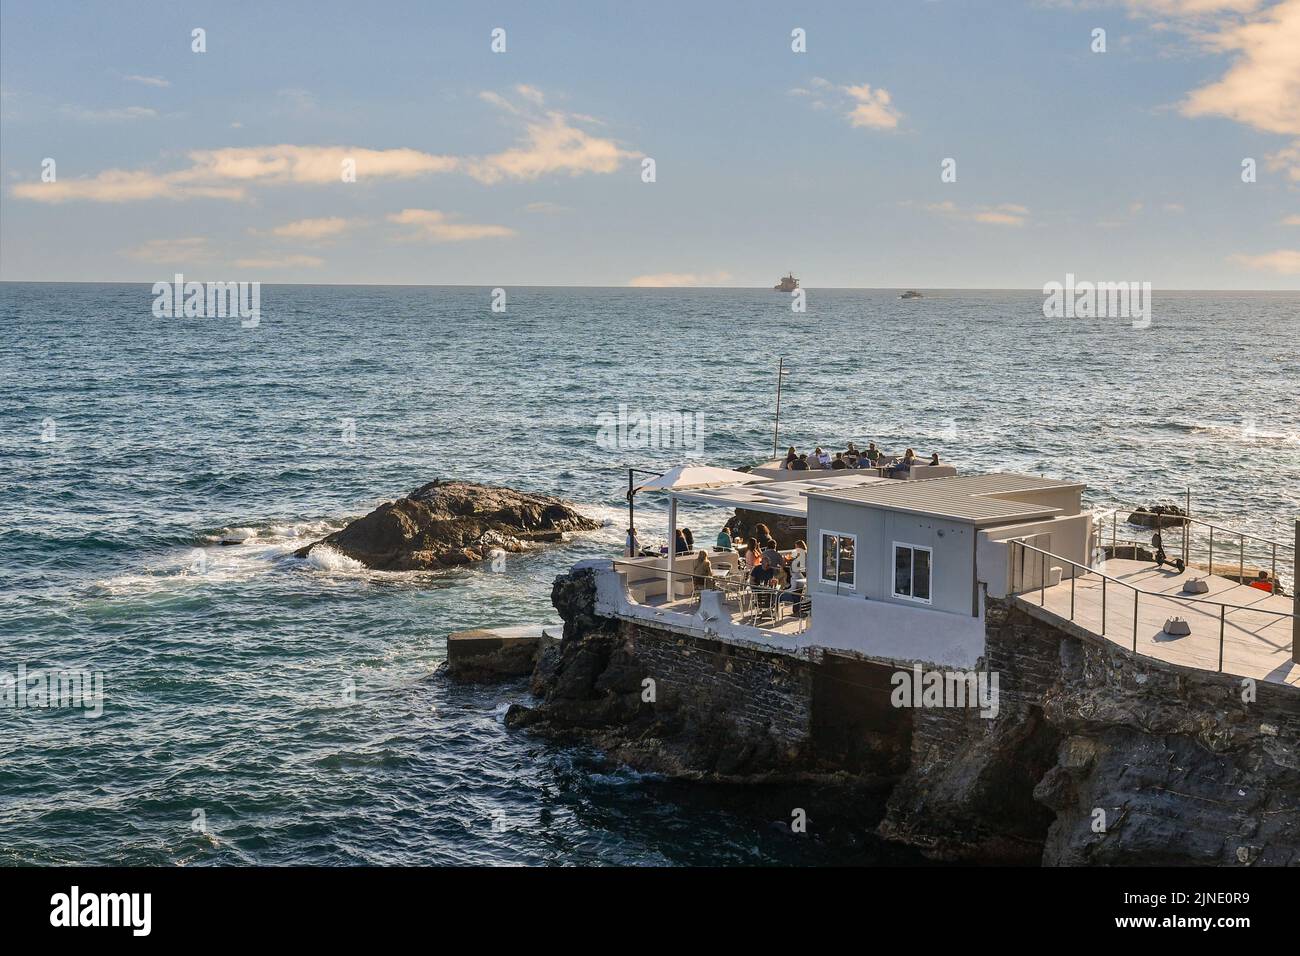 Elevated view of a beach cafè on the cliff by the sea with people having aperitifs at sunset, Nervi, Genoa, Liguria, Italy Stock Photo